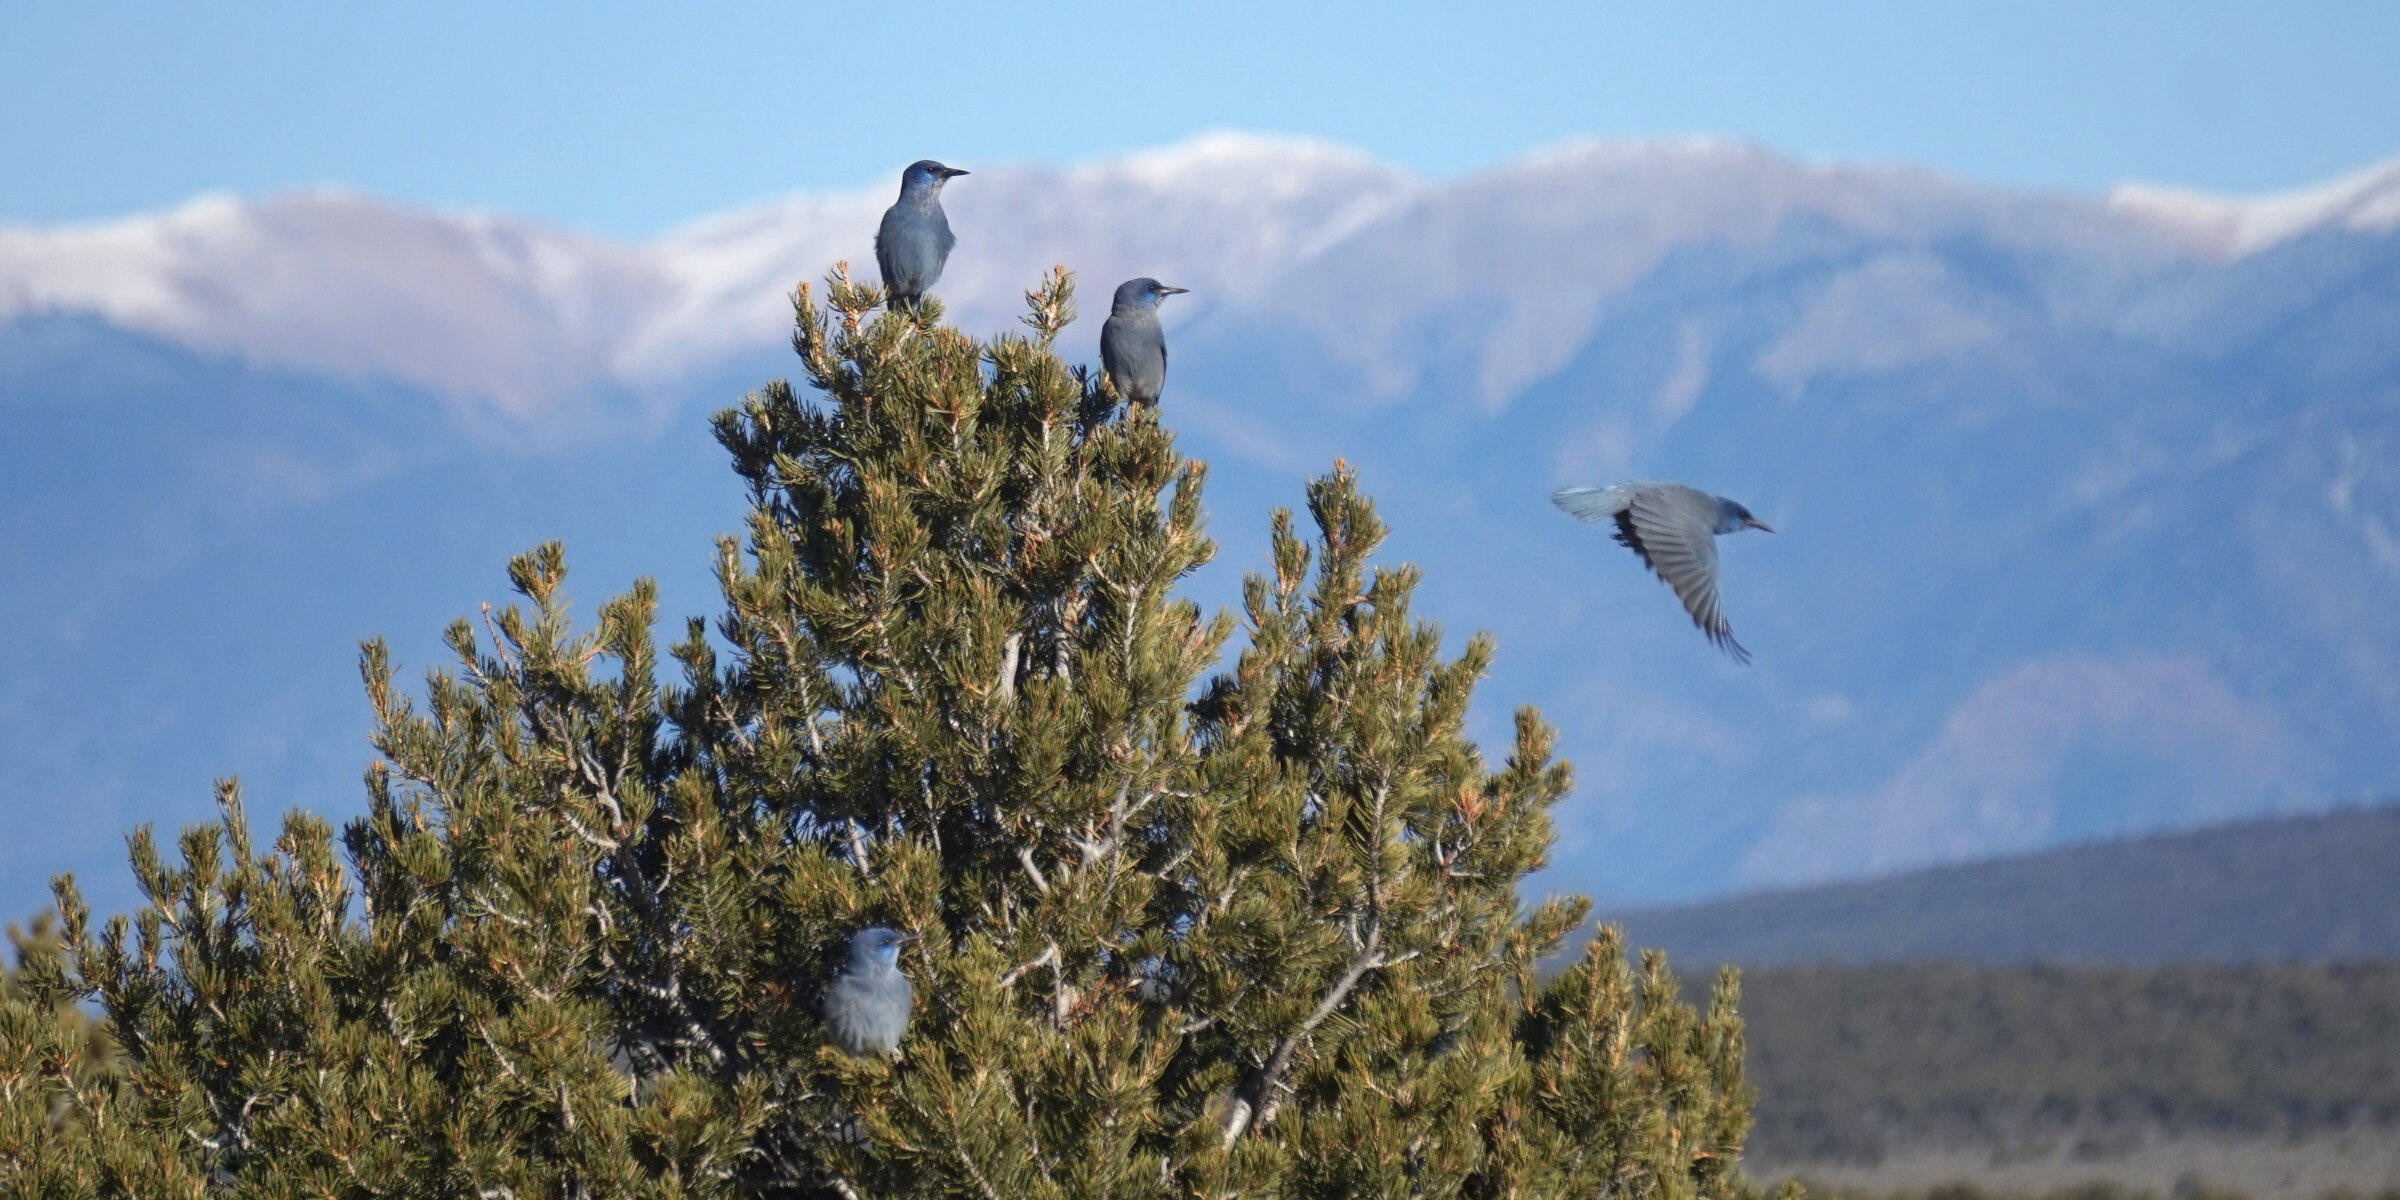 A group of Pinyon Jays, blue birds with grayish bodies, perch and take off from what is probably a pinon tree, with snow-capped mountains in the distance.